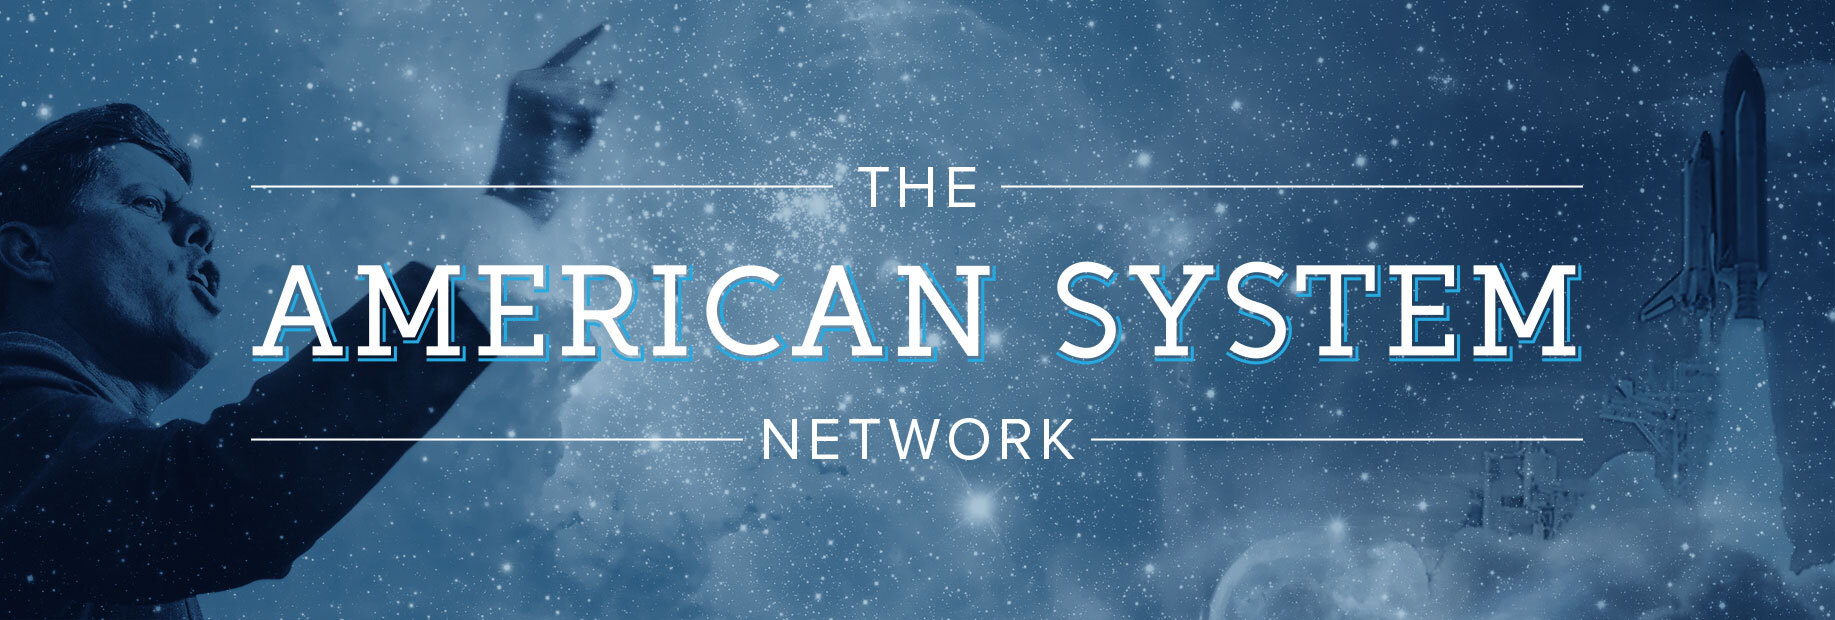 The American System header image 1